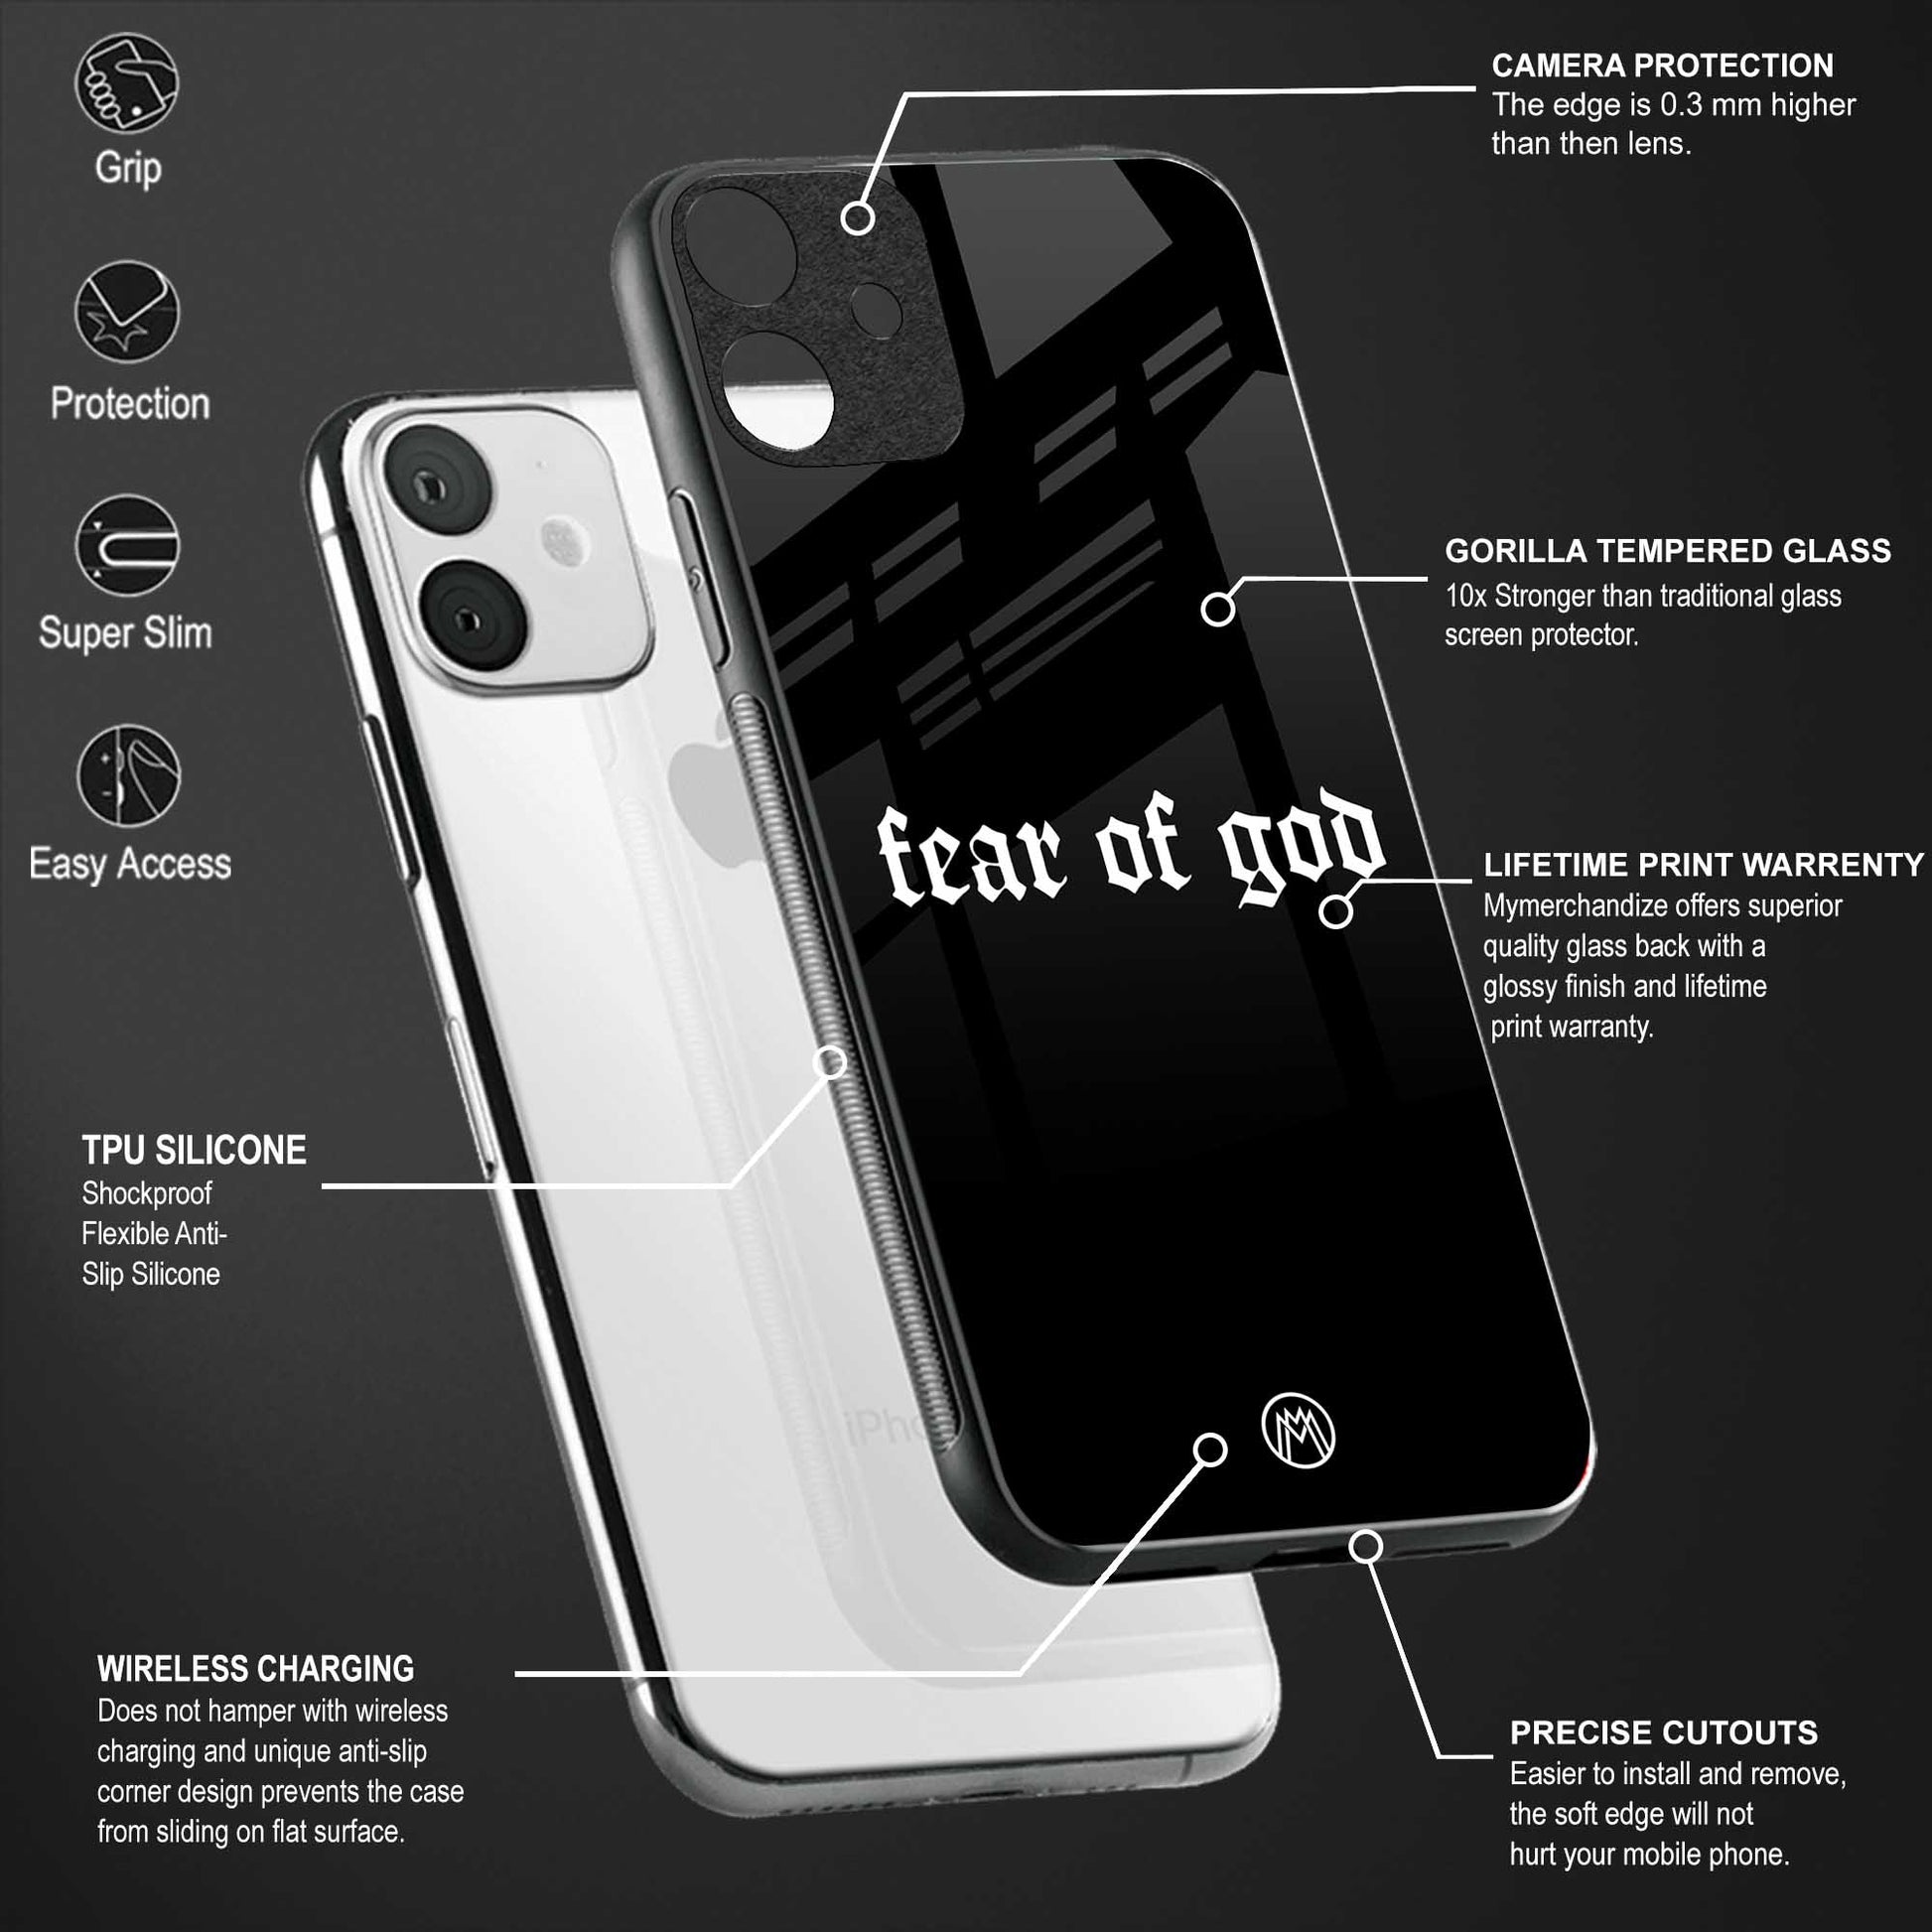 fear of god phone cover for samsung galaxy f62